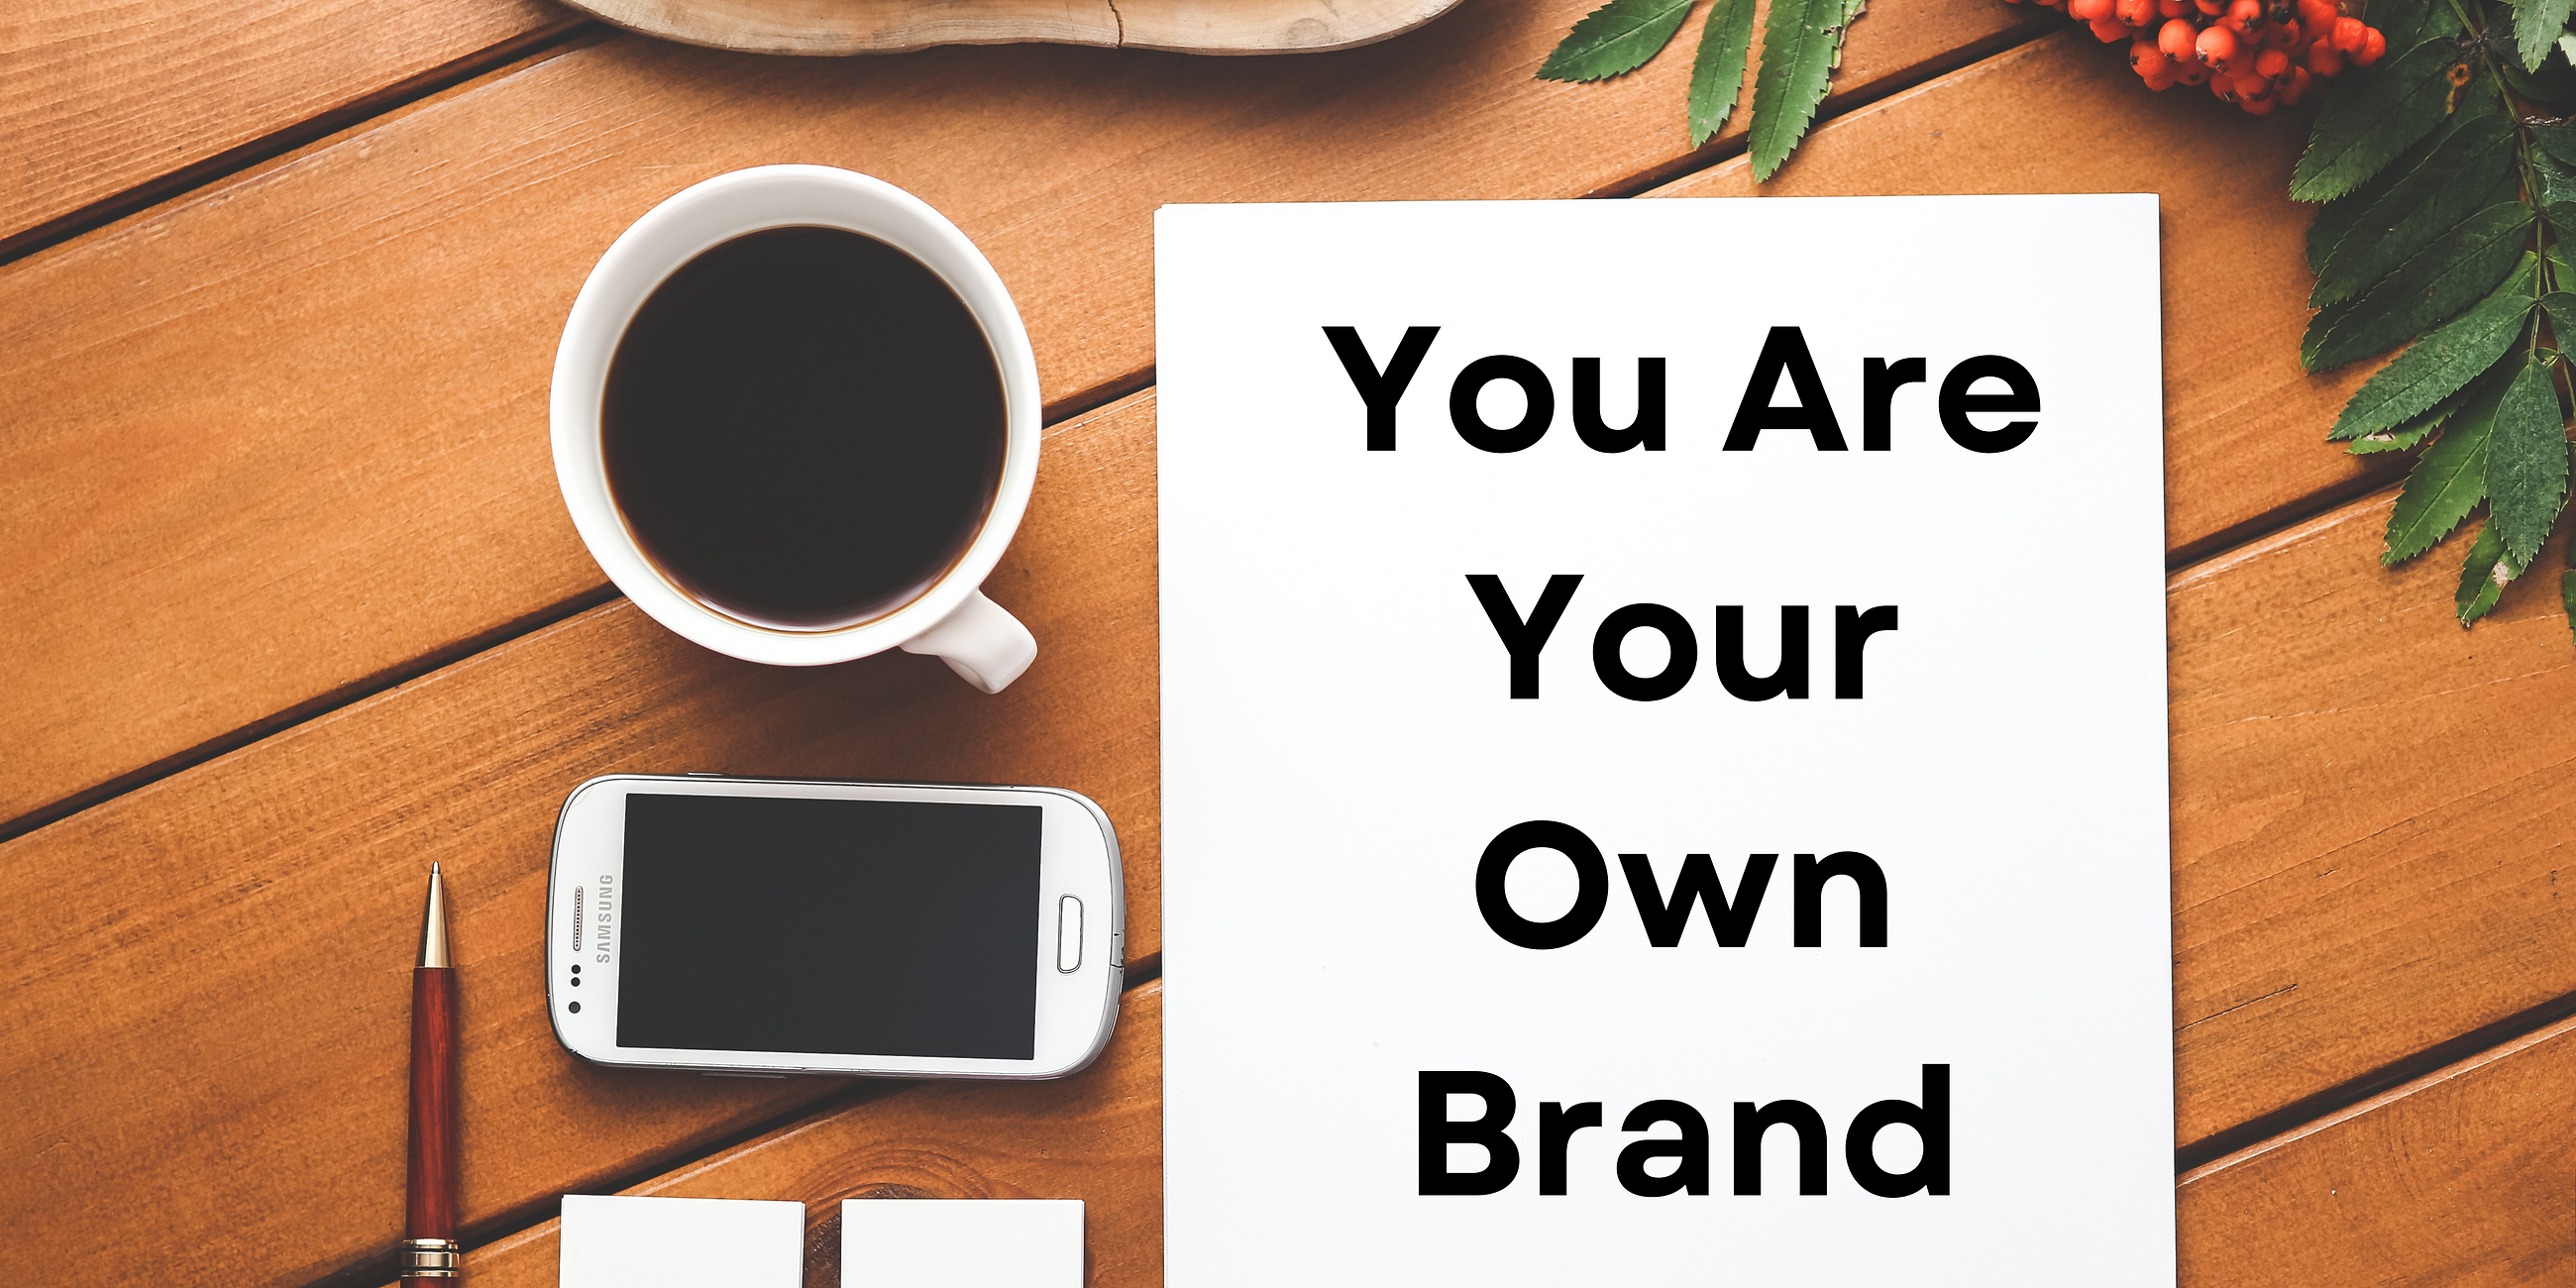 Why is personal branding important for artists?